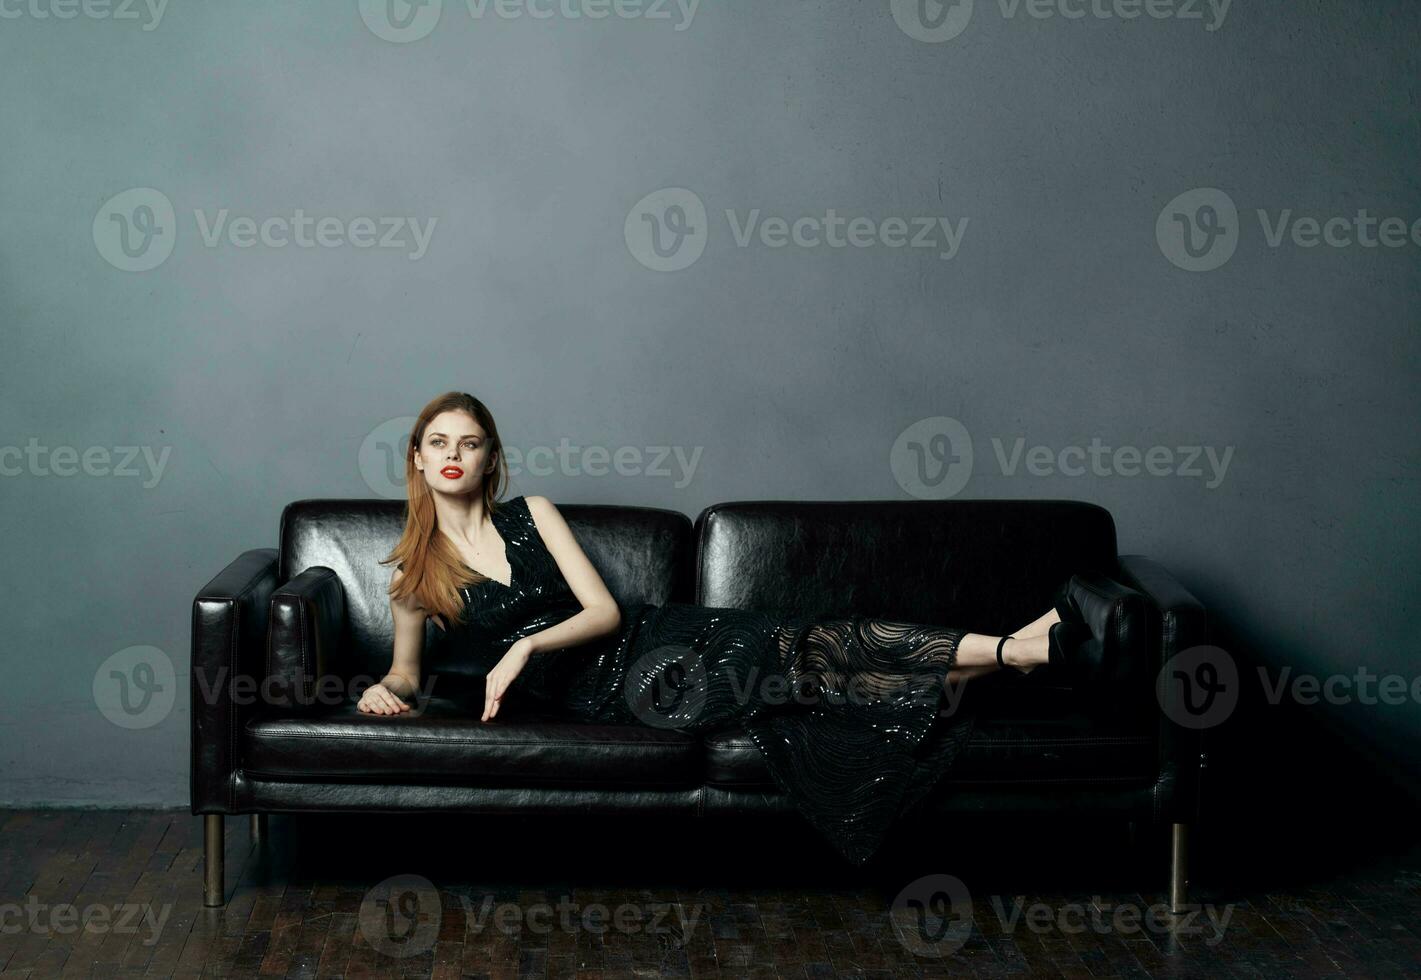 An elegant lady in a black dress lies on a leather sofa indoors in full growth photo